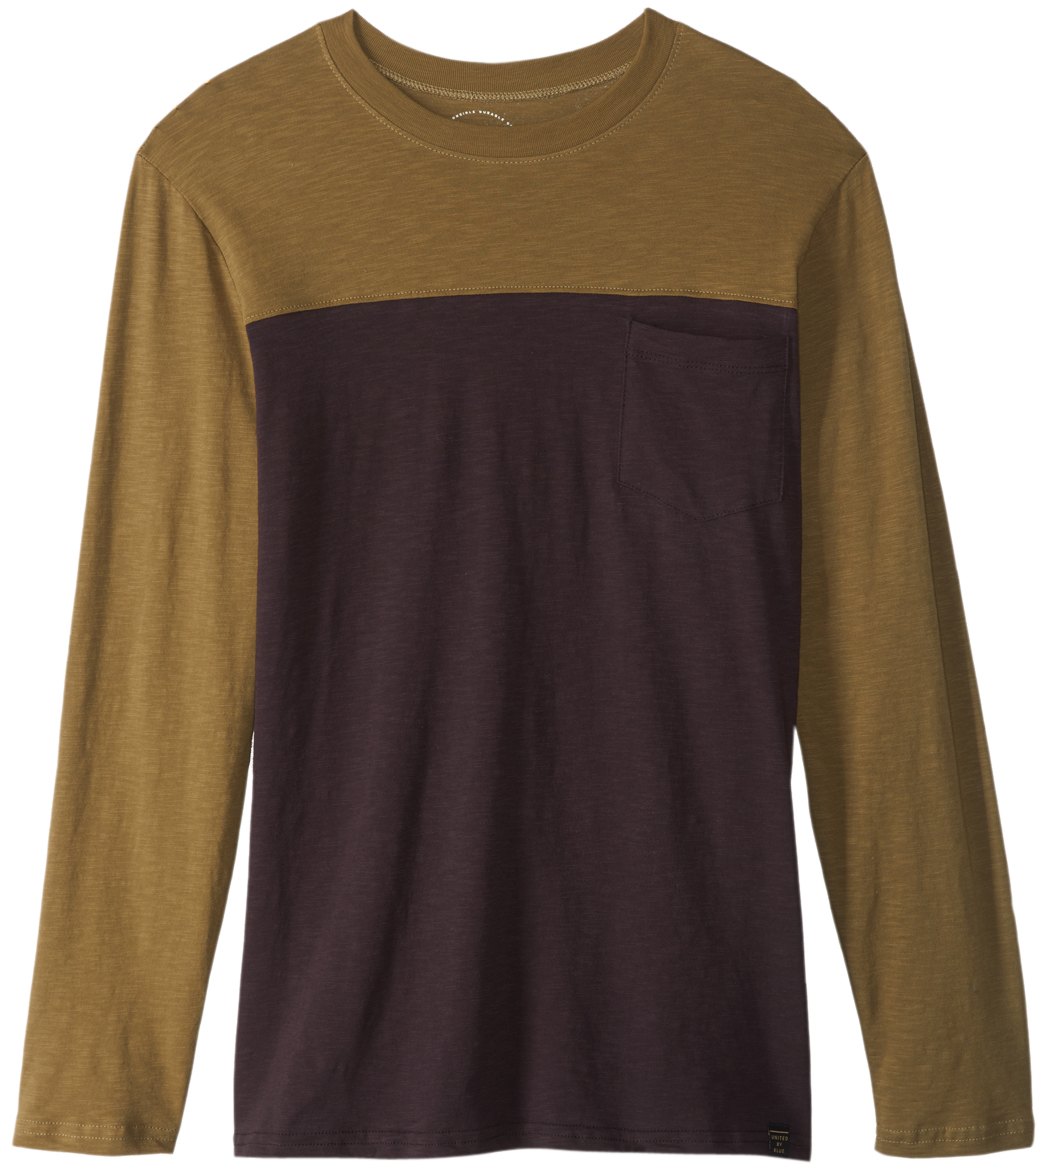 United By Blue Men's Whitfield Long Sleeve Tee Shirt - Olive/Black Medium - Swimoutlet.com